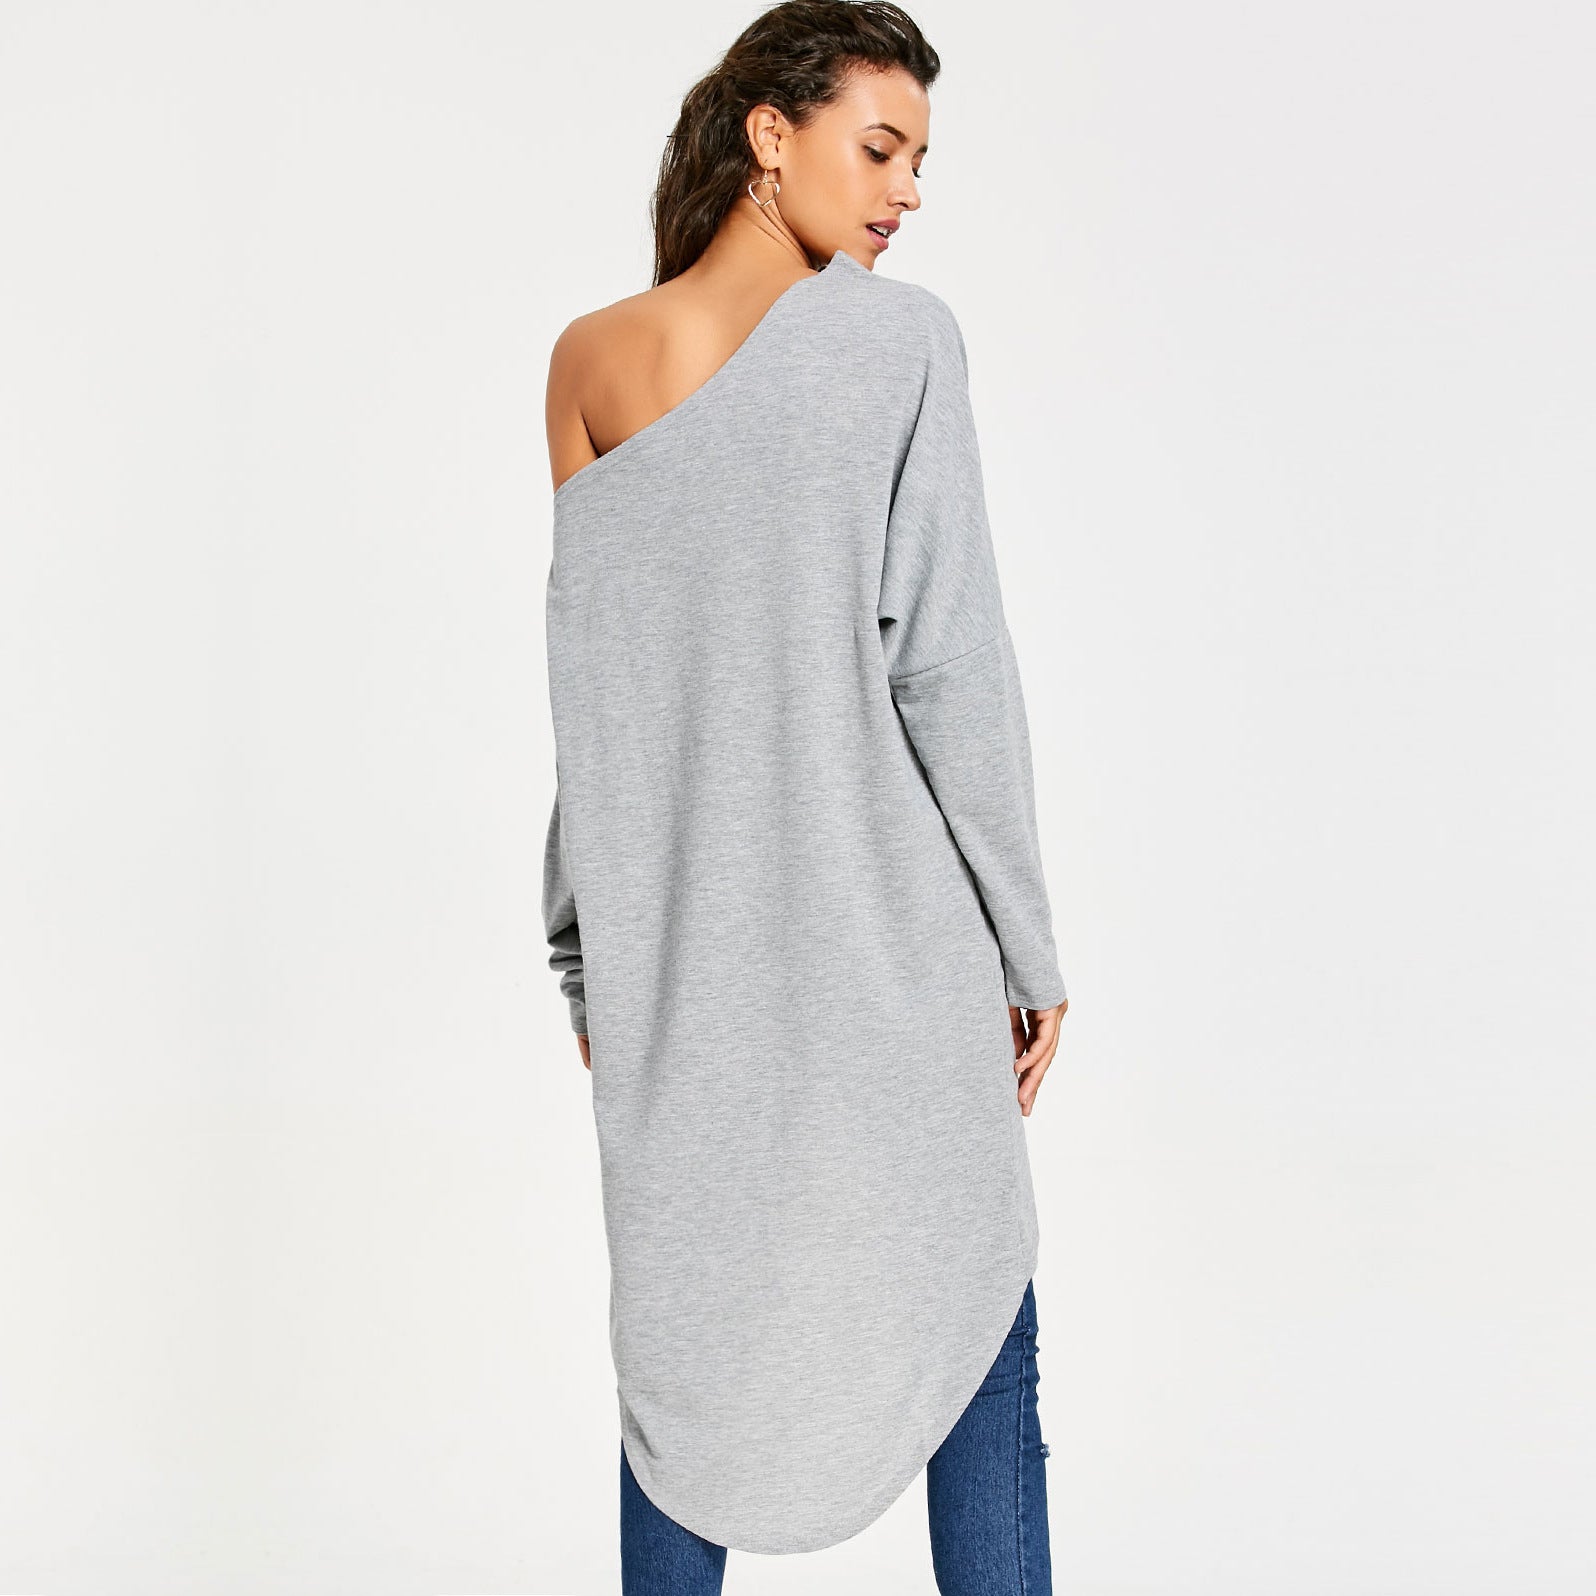 Casual Gray Irregular One Shoulder Long Sleeves Tops-Dresses-Gray-S-Free Shipping Leatheretro